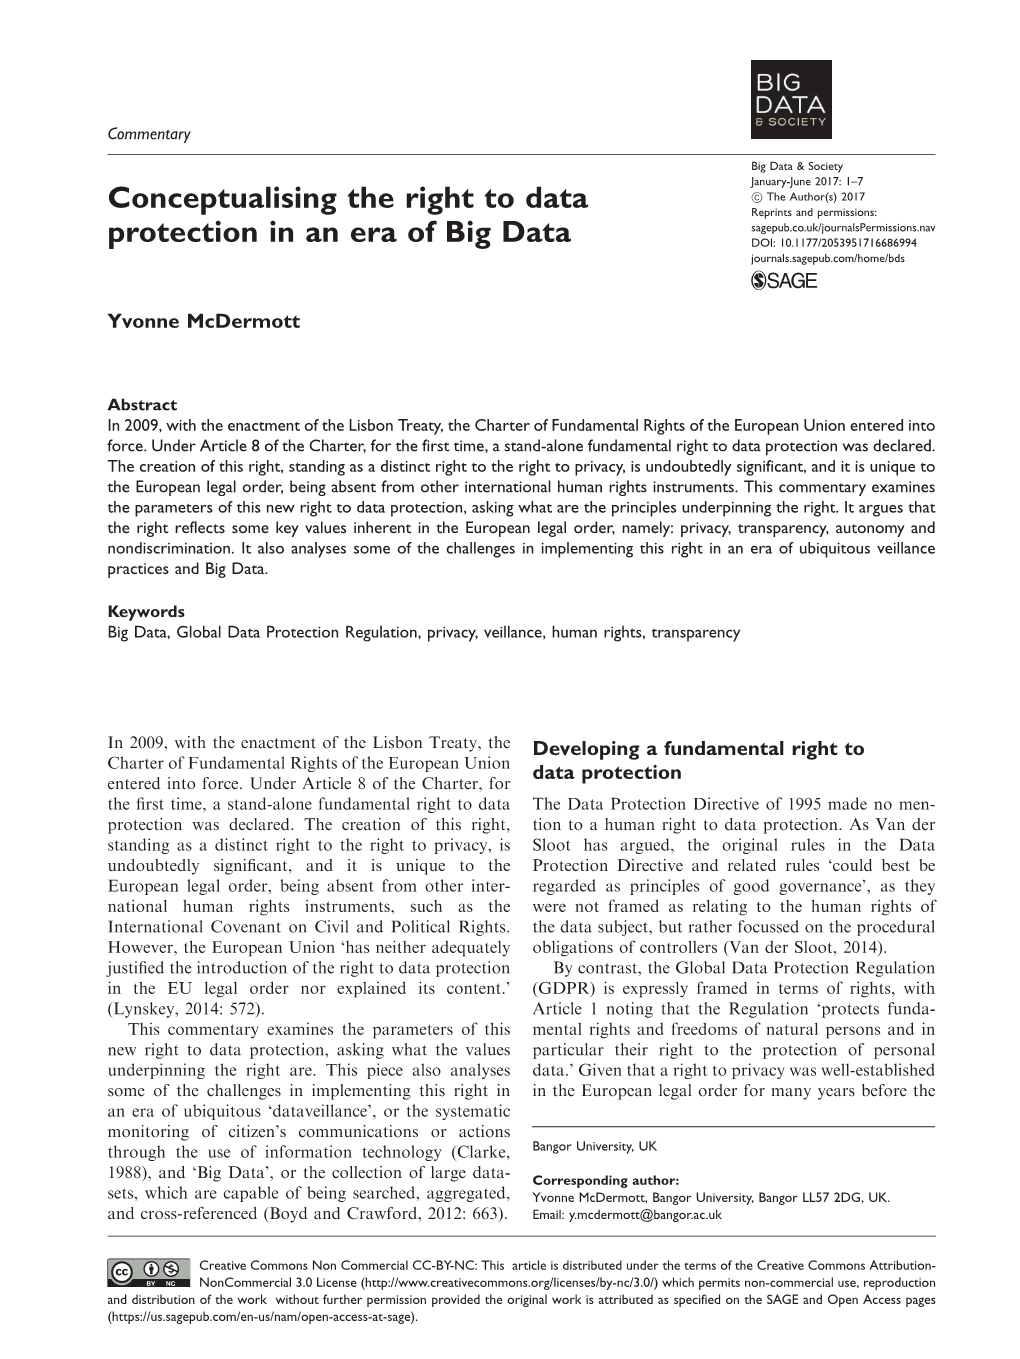 Conceptualising the Right to Data Protection in an Era of Big Data